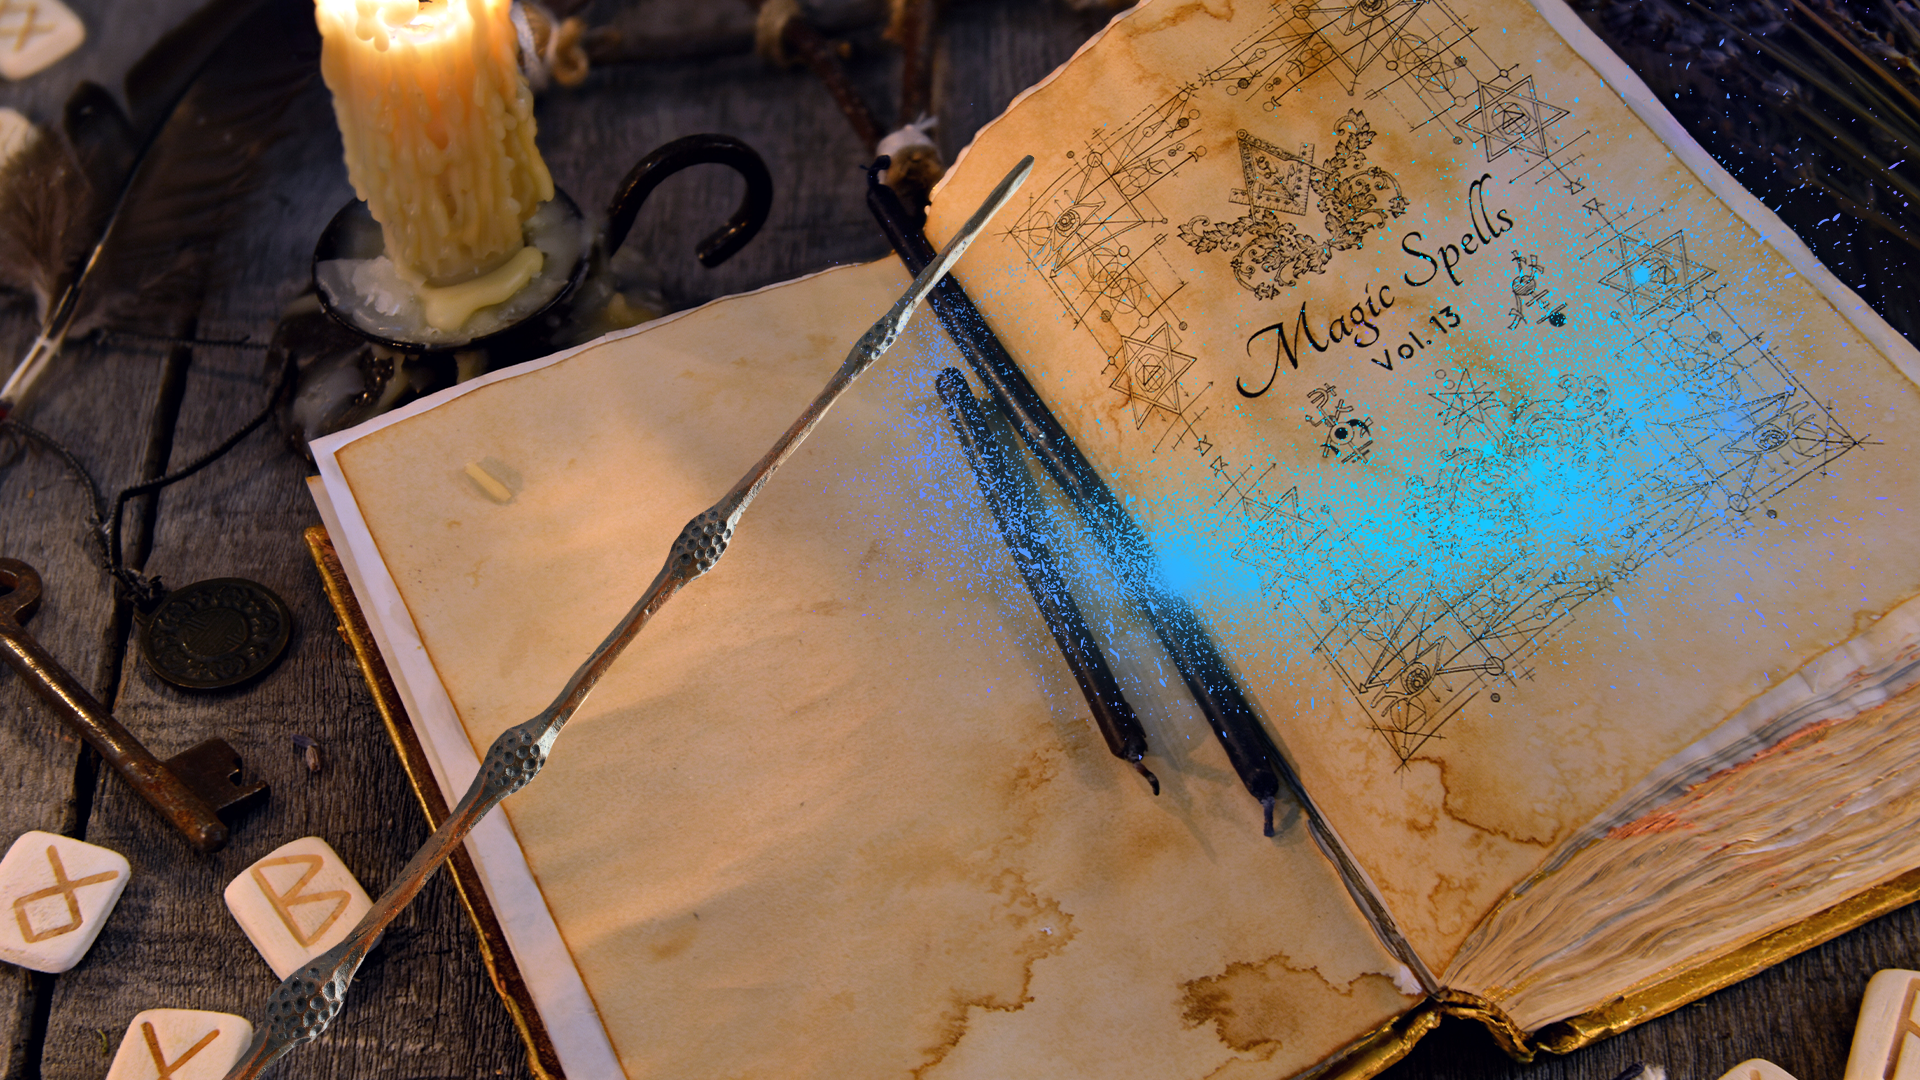 Spell book and runes with Beano wand and magic